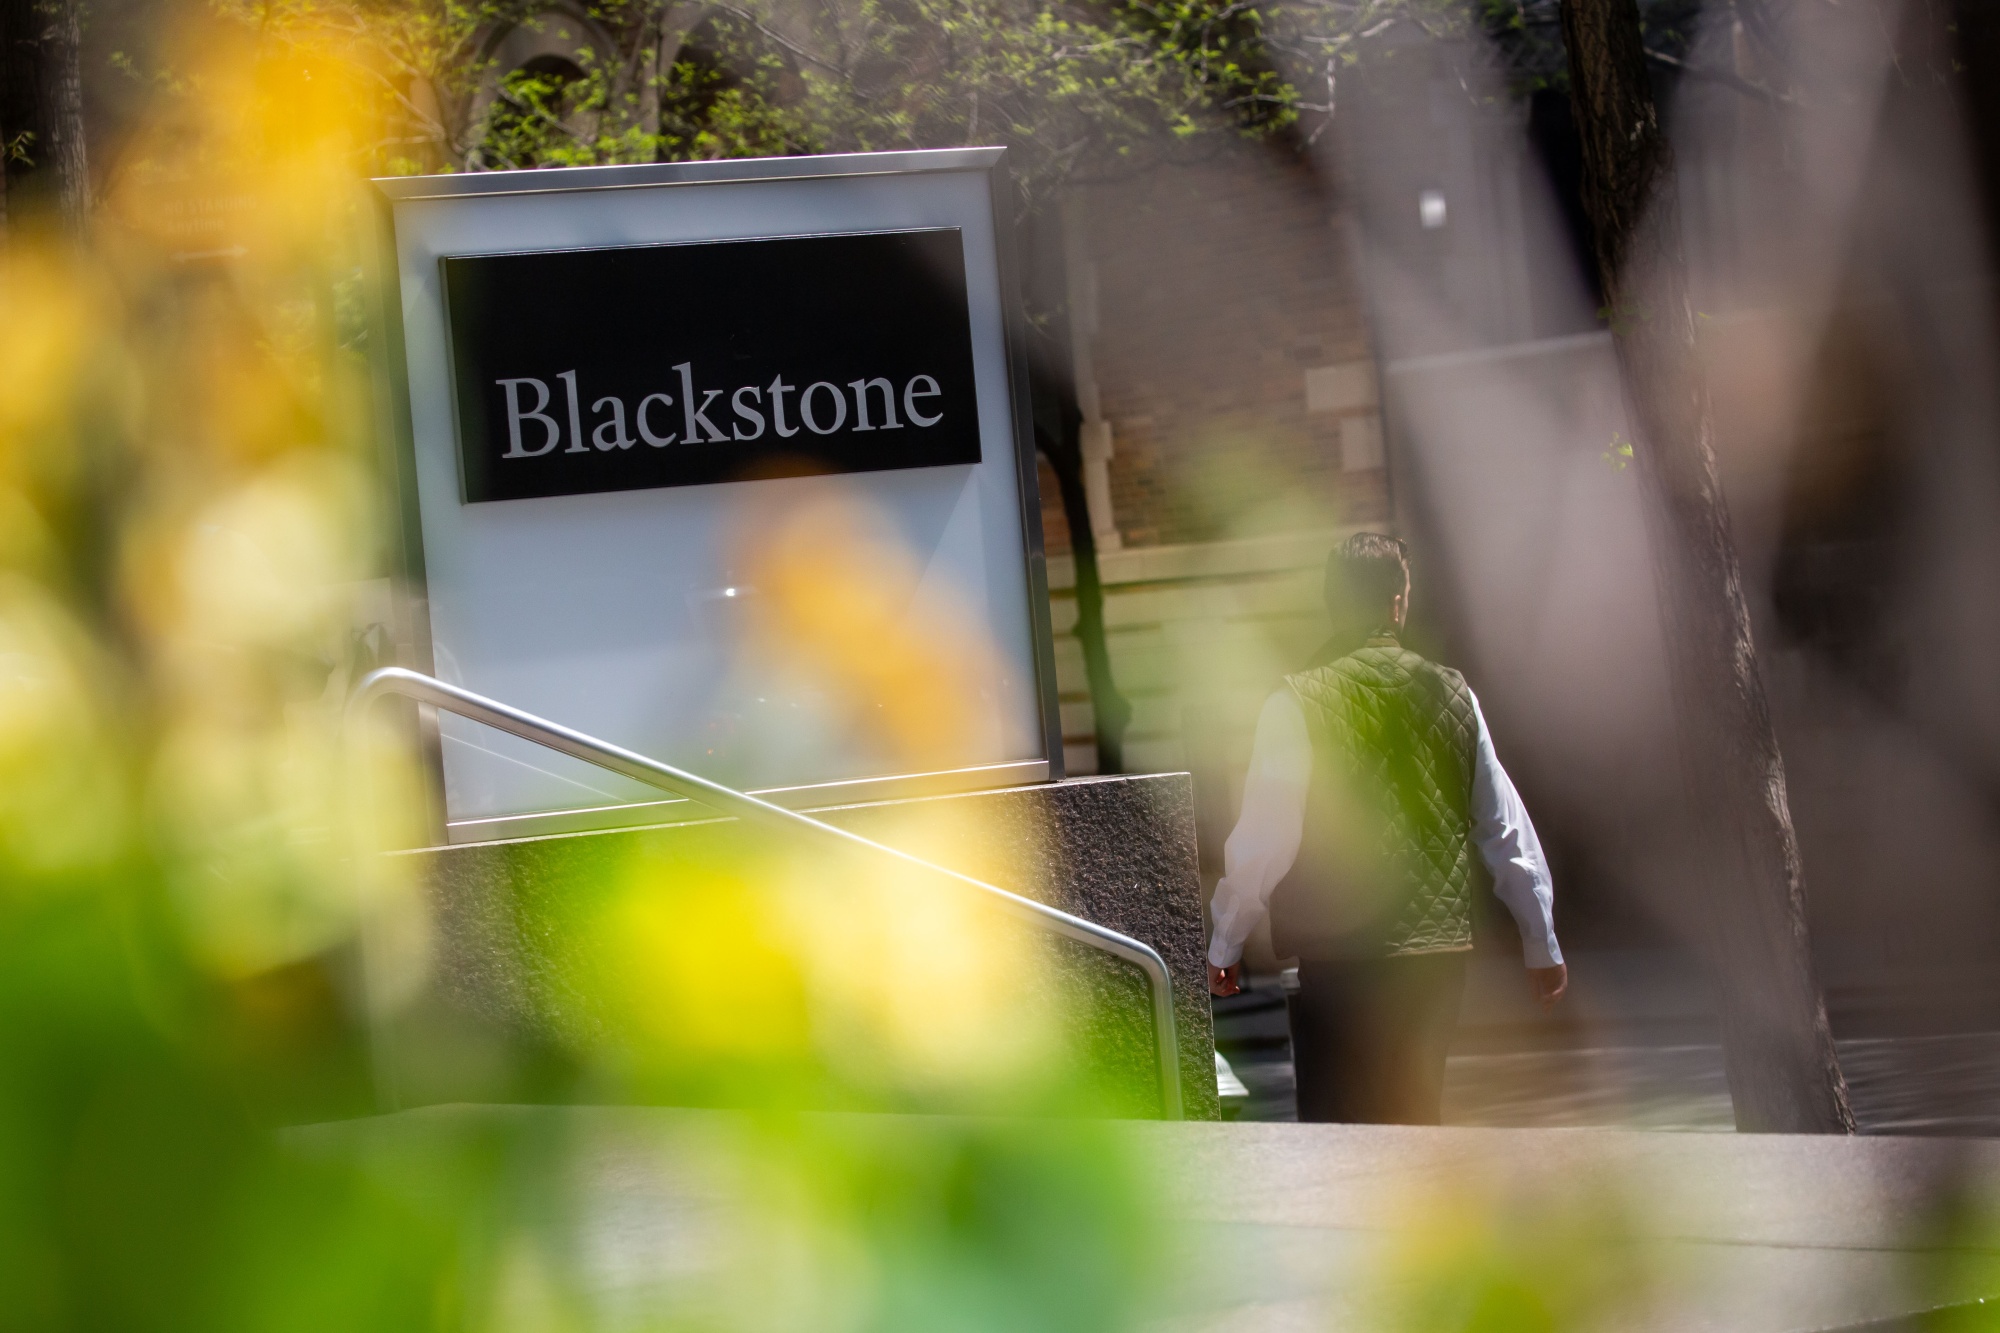 Blackstone Is Said to Weigh Offers for Stake in Bellagio Casino - Bloomberg